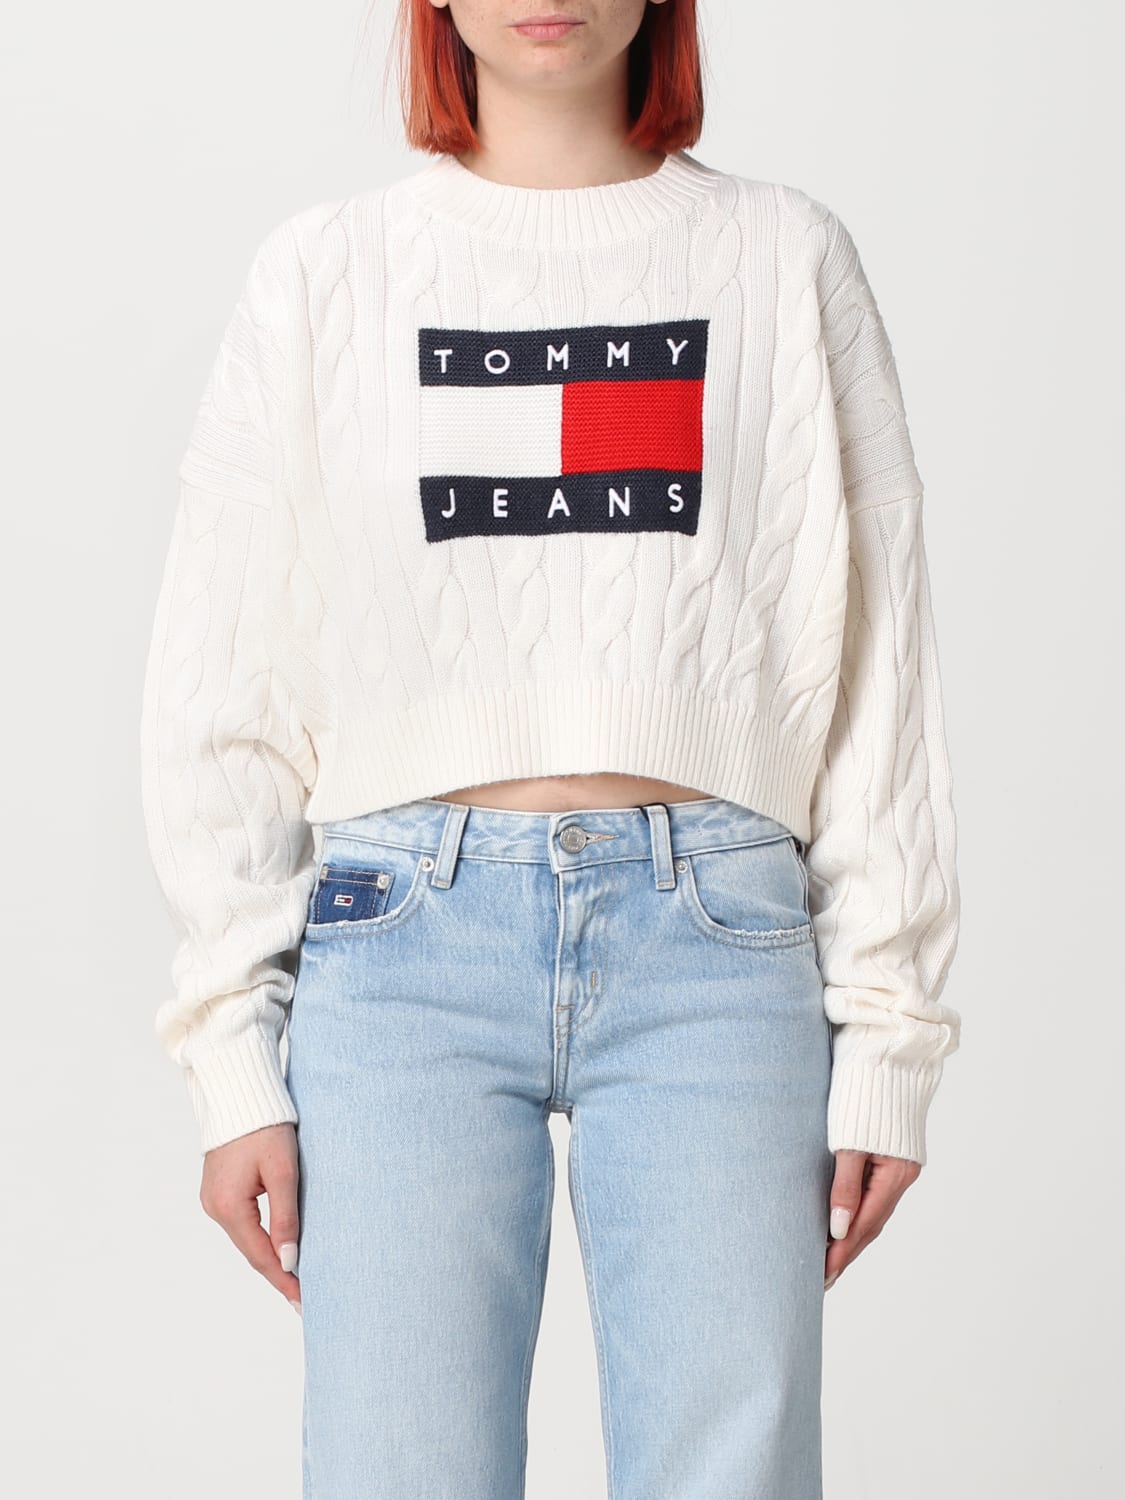 TOMMY JEANS: Sweater woman - White | TOMMY JEANS sweater